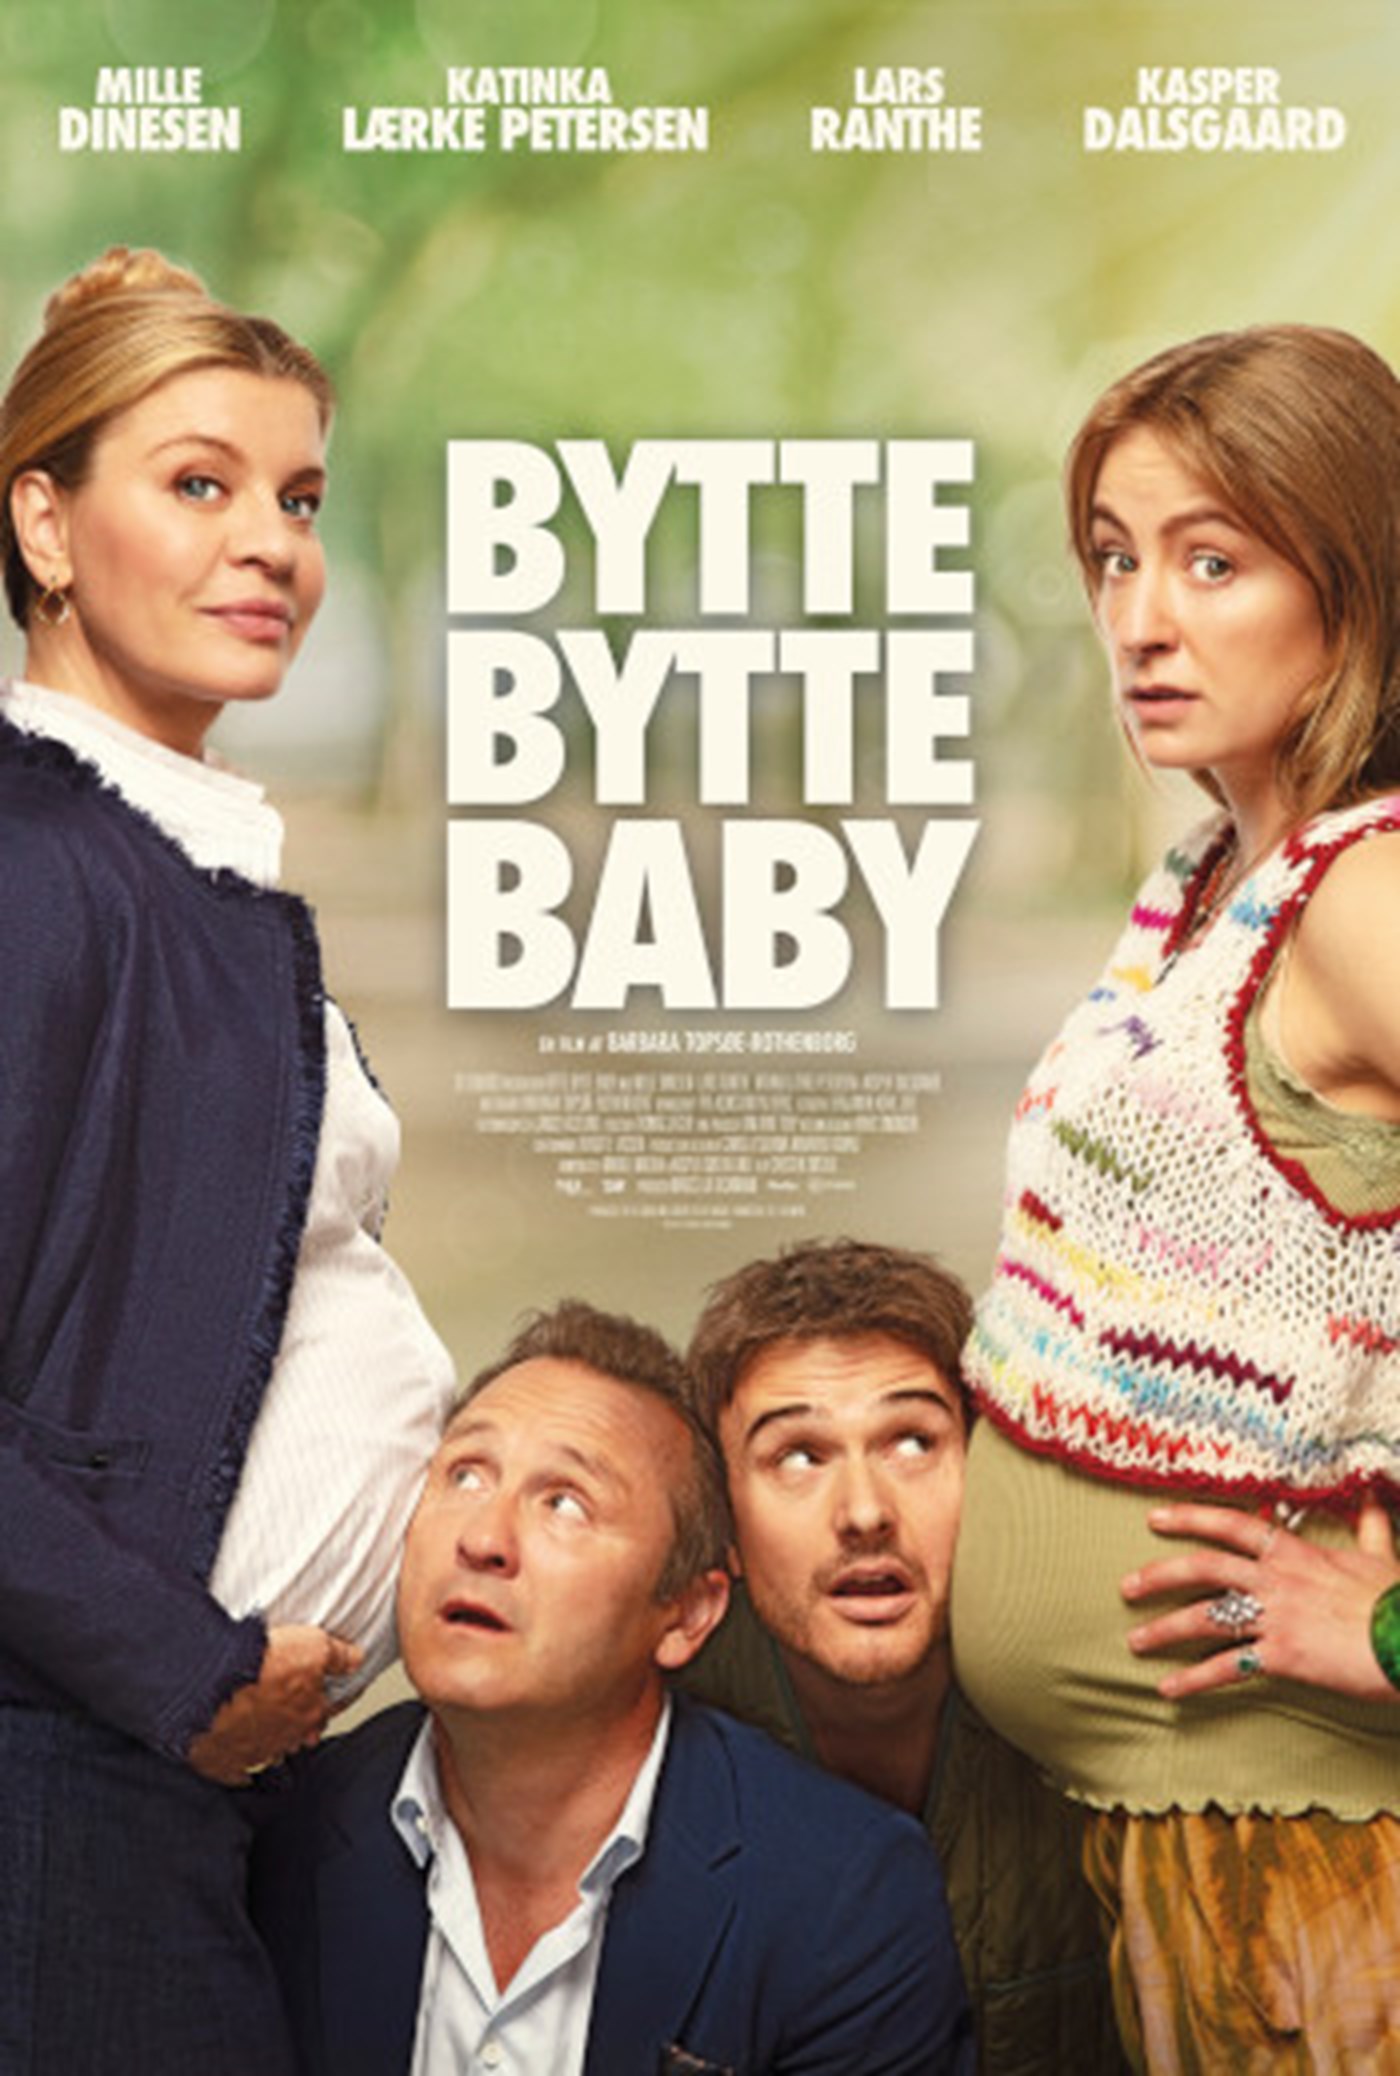 Bytte bytte baby 2/5